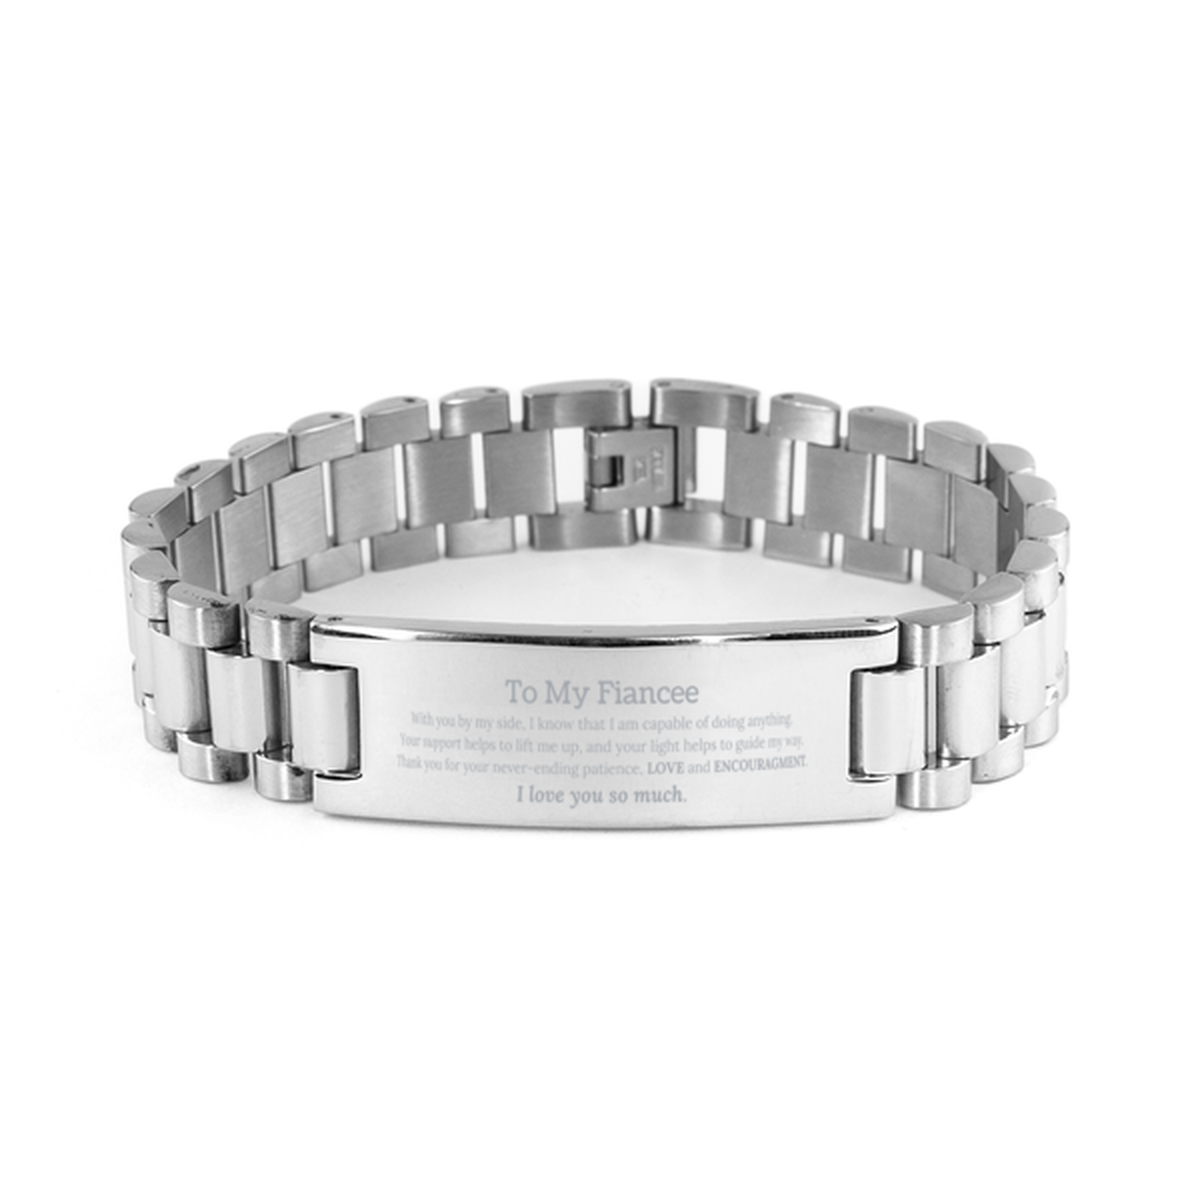 Appreciation Fiancee Ladder Stainless Steel Bracelet Gifts, To My Fiancee Birthday Christmas Wedding Keepsake Gifts for Fiancee With you by my side, I know that I am capable of doing anything. I love you so much